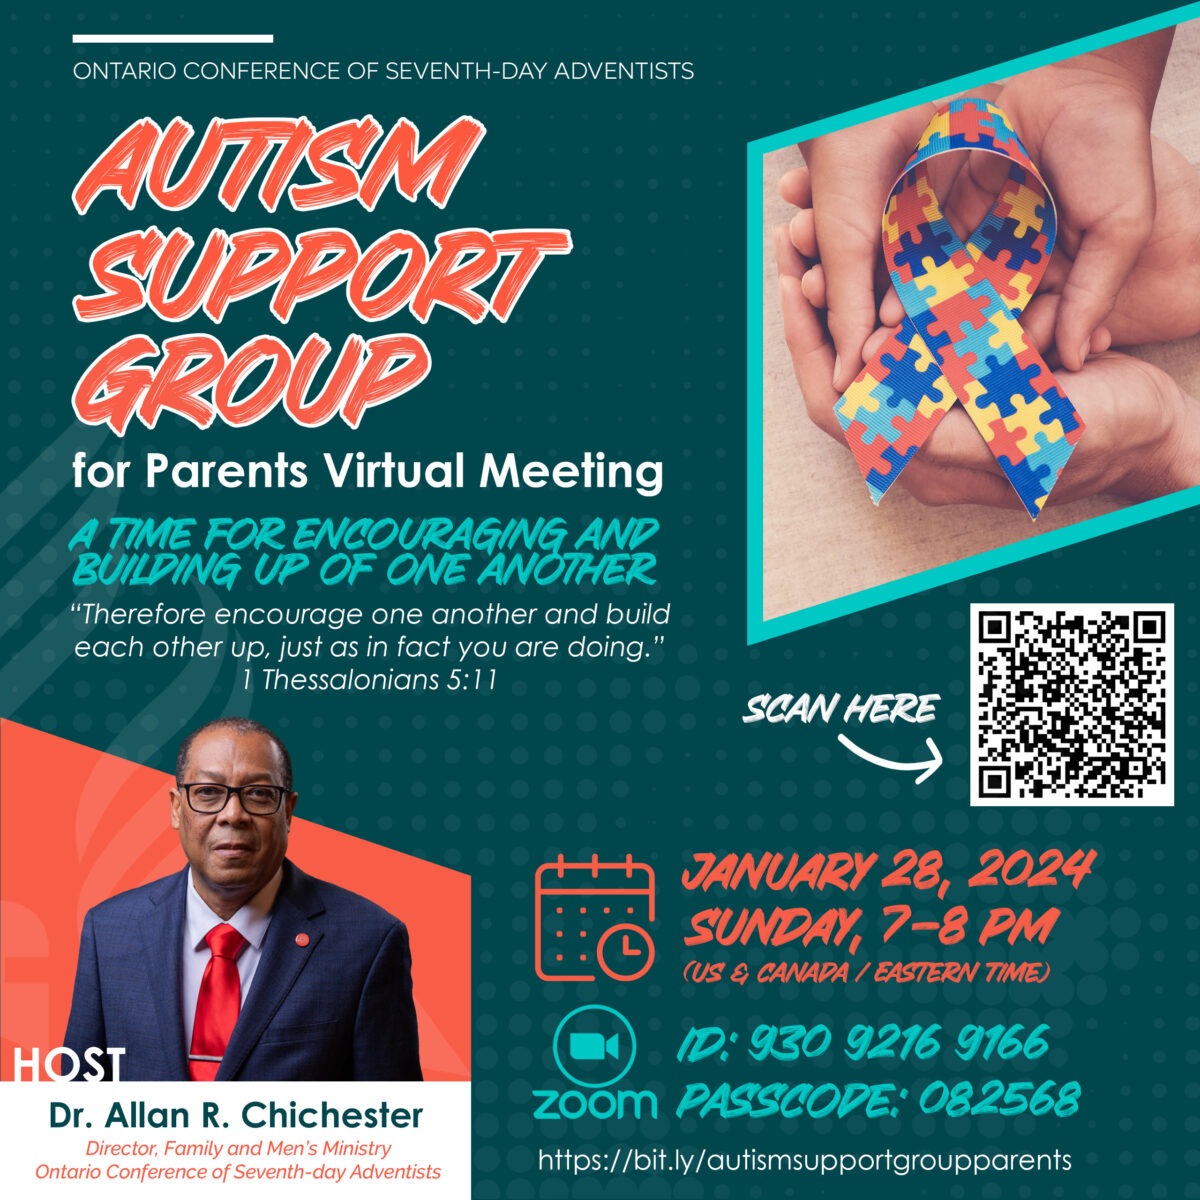 Autism Support Group for Parents Virtual Meeting